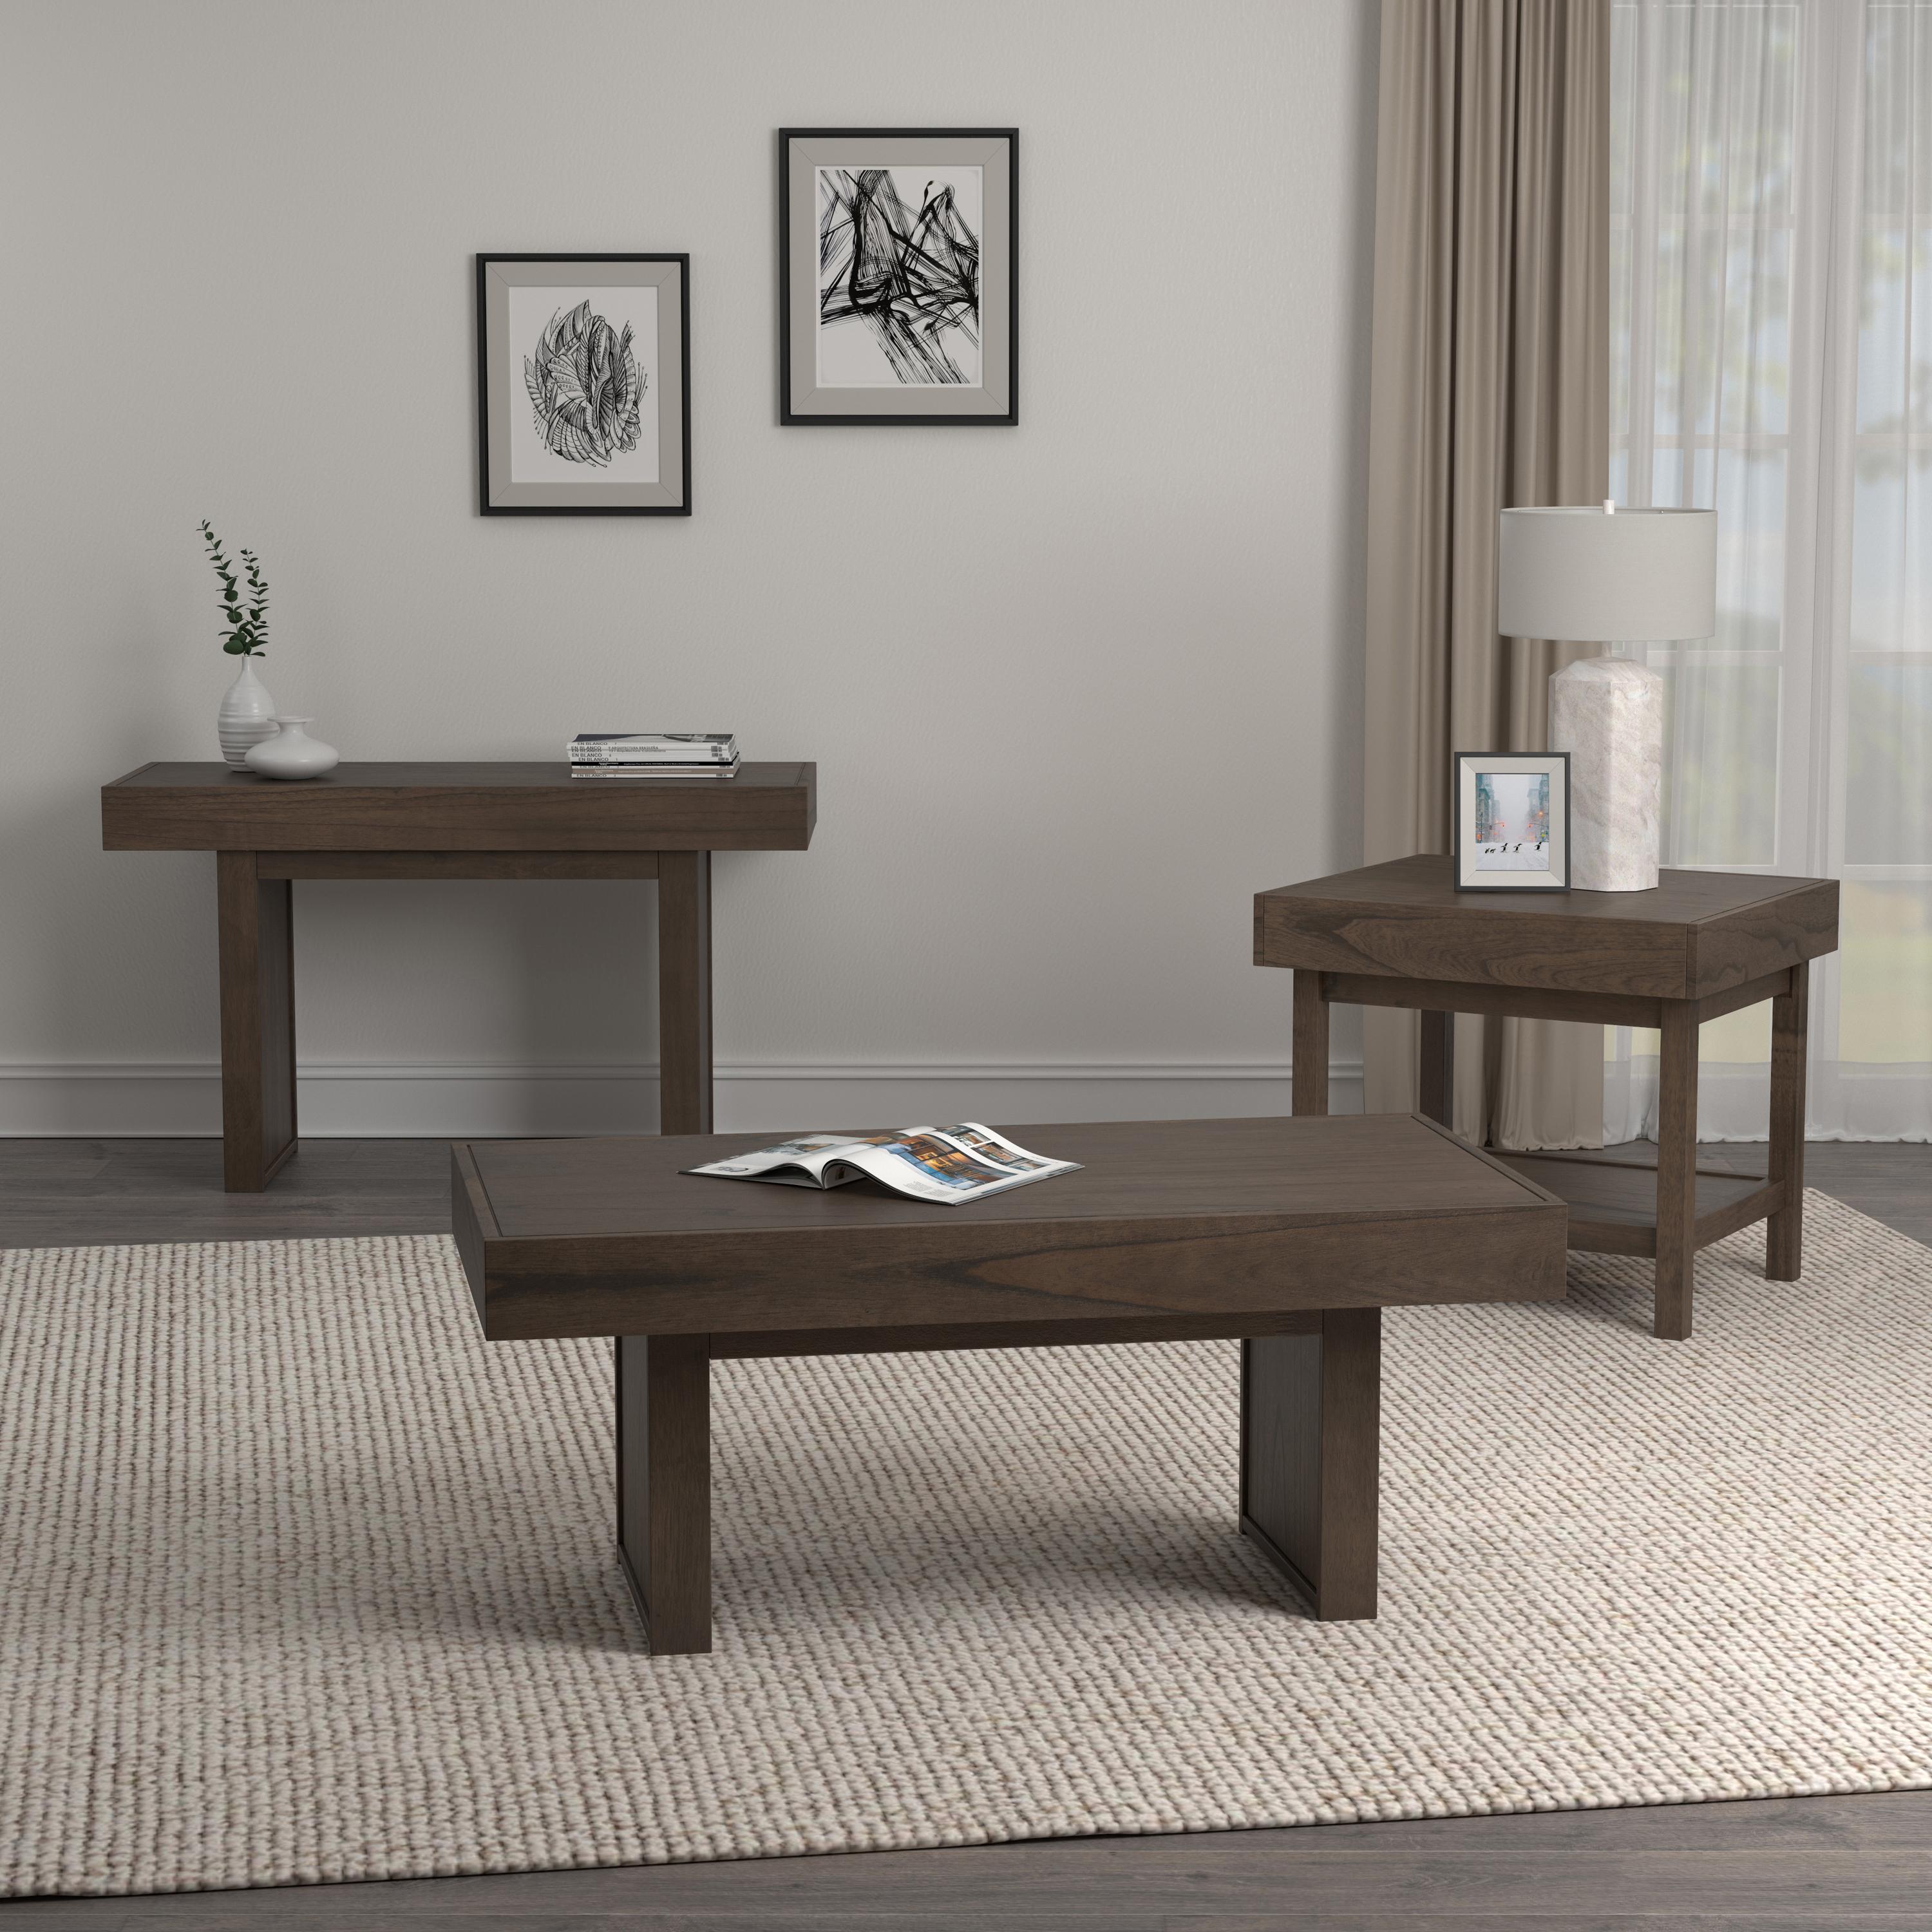 Modern Coffee Table Set 723118-S3 723118-S3 in Brown 